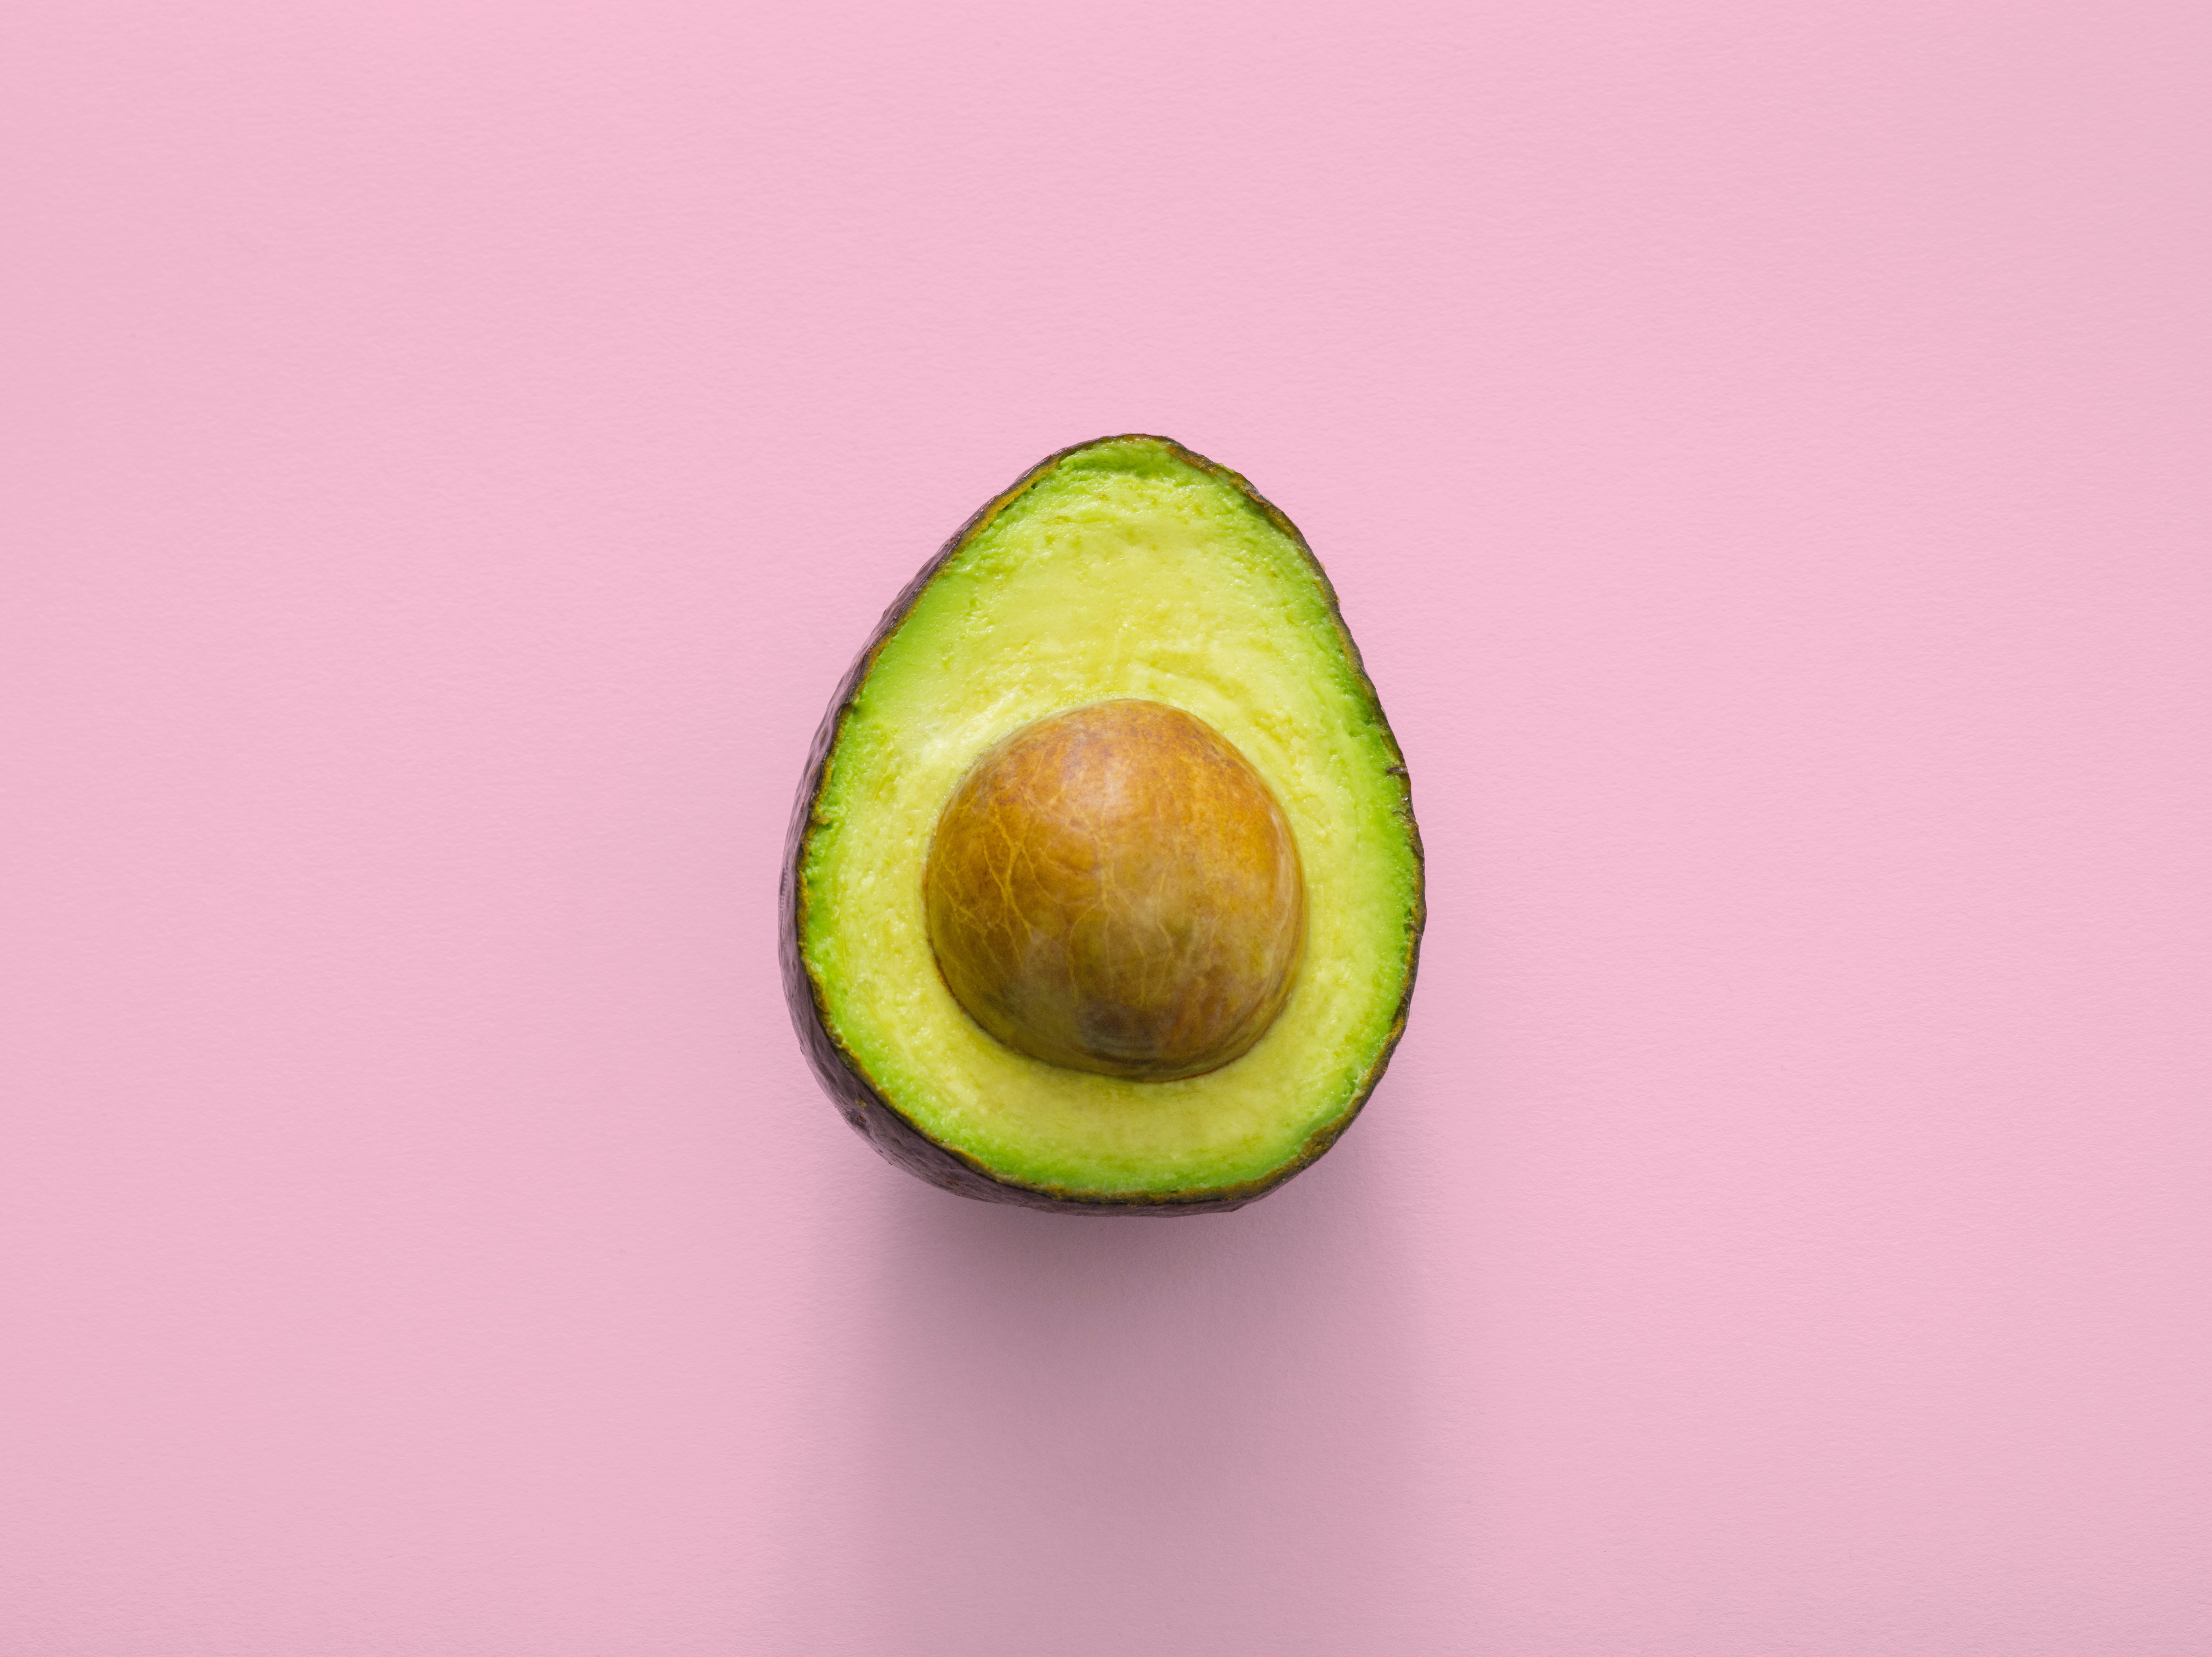 Avocado is a good type of fat for weight loss